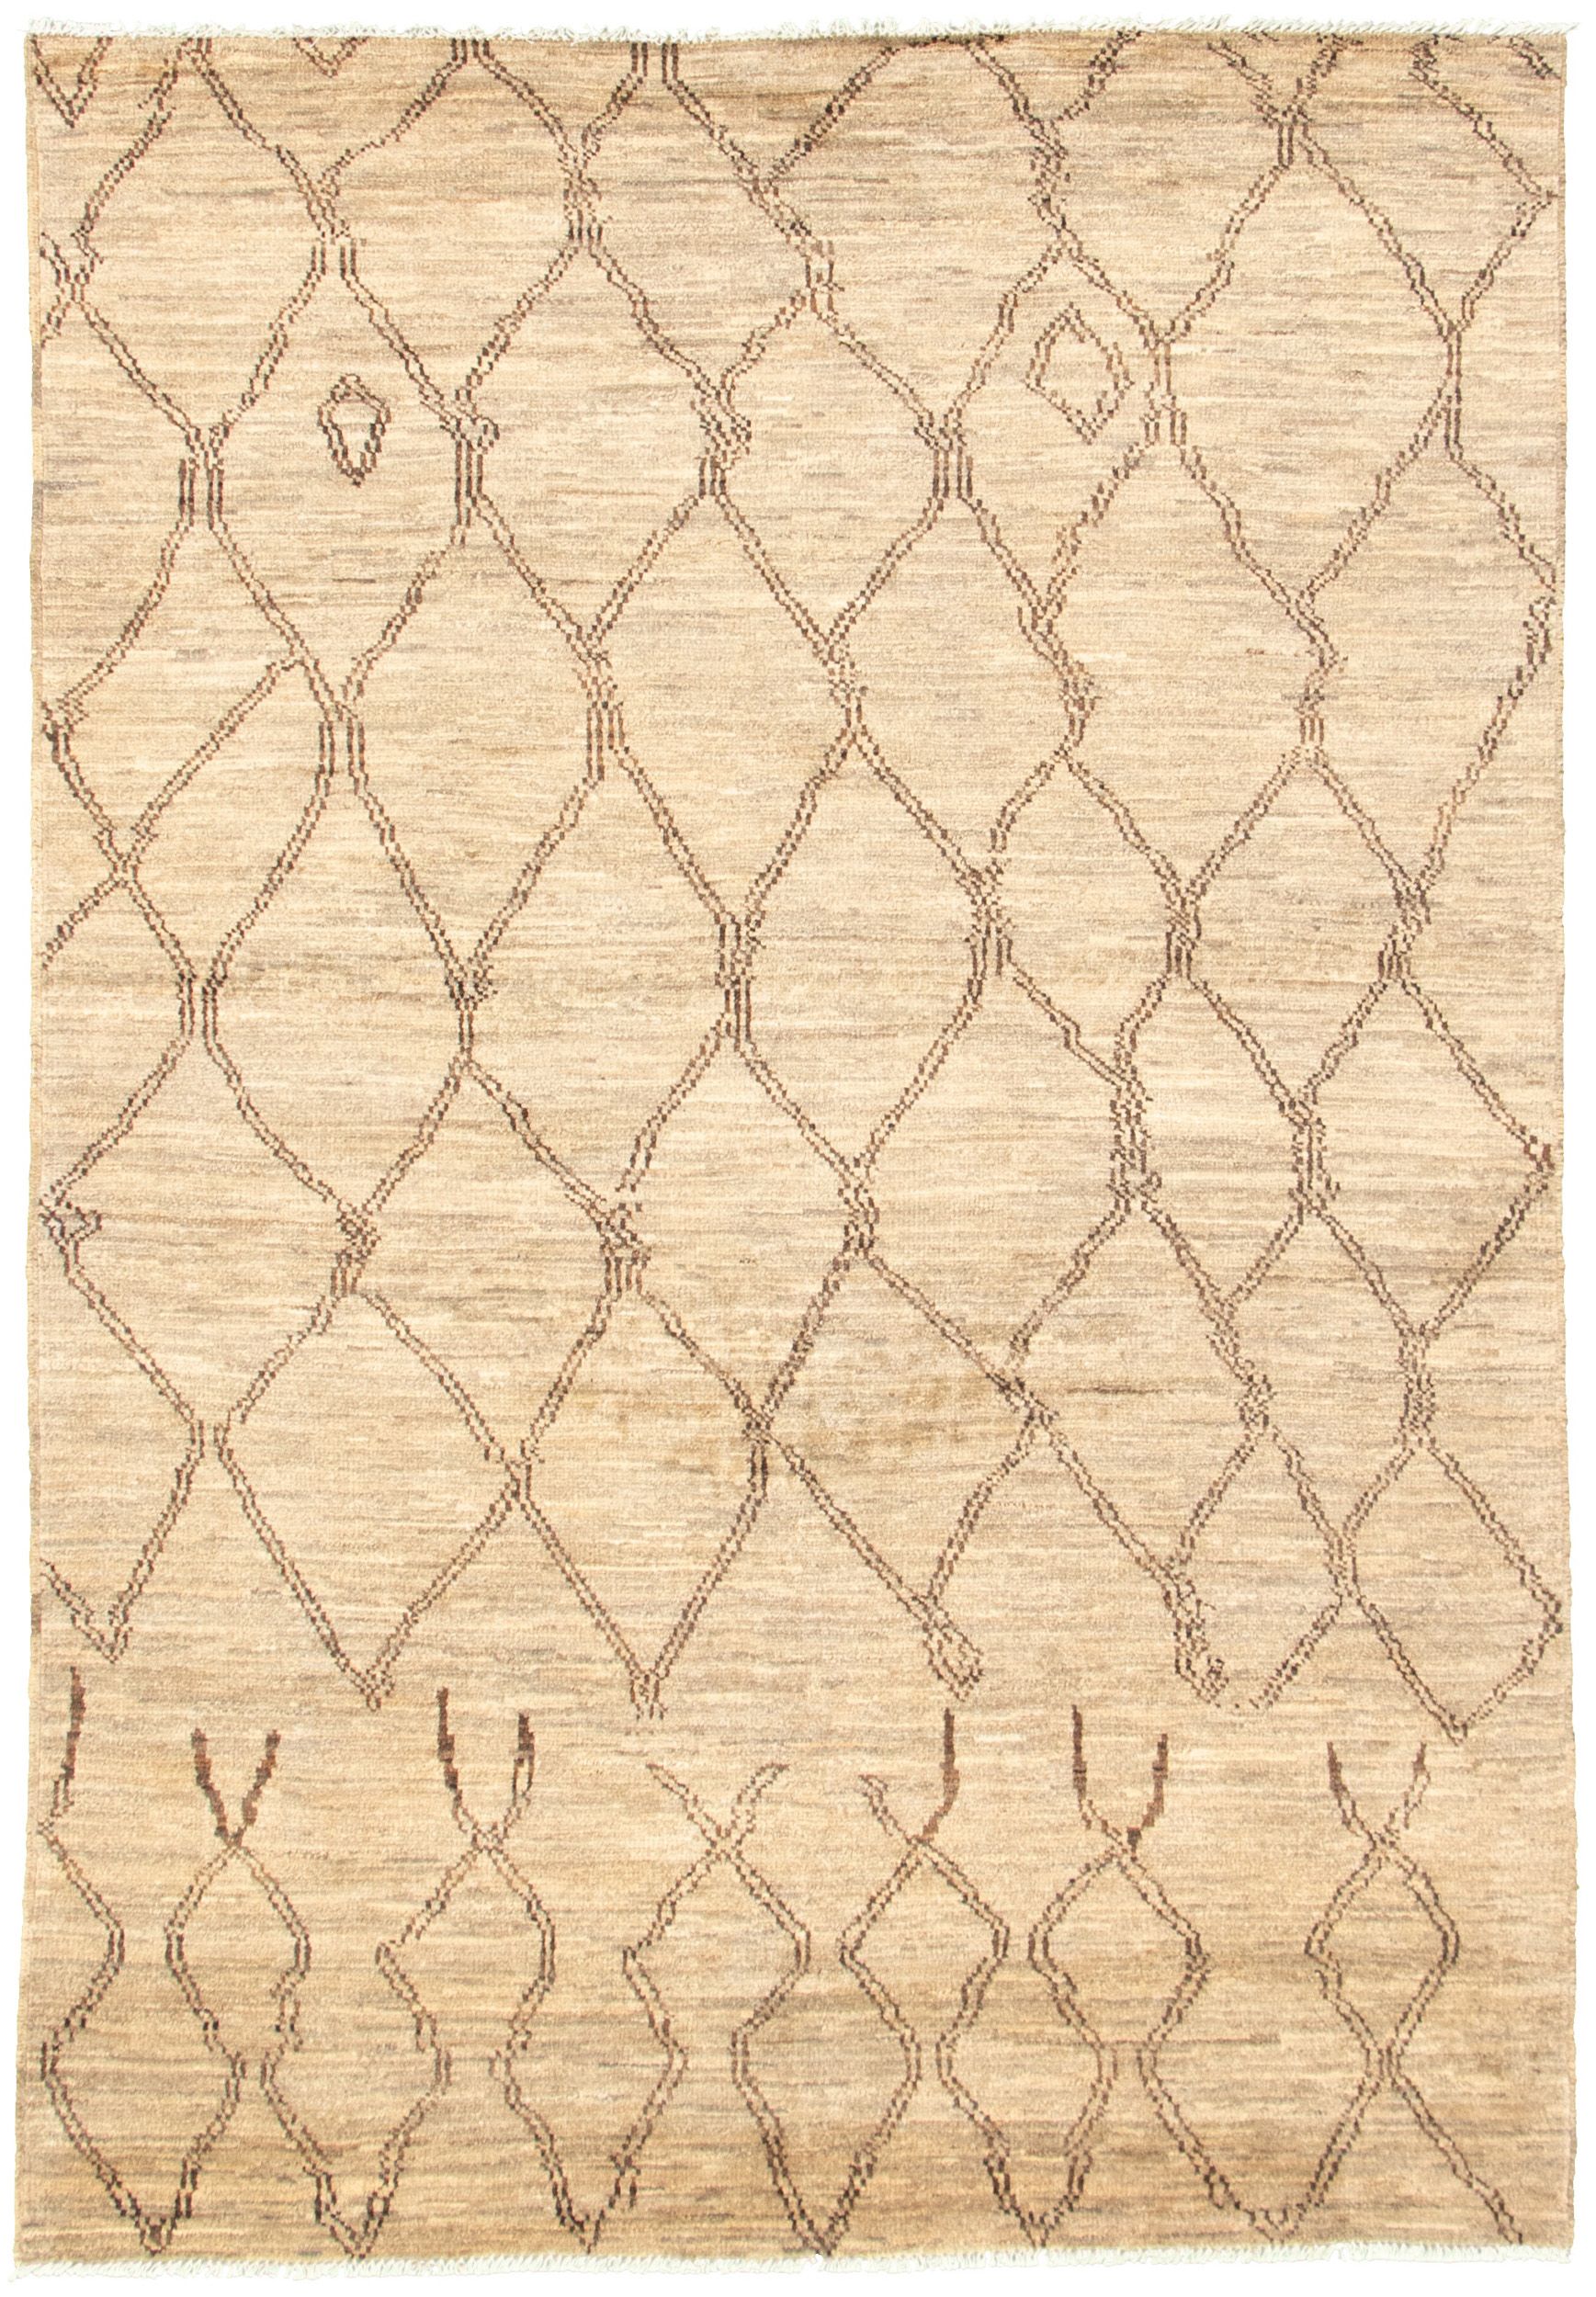 Hand-knotted Marrakech Grey, Khaki Wool Rug 6'0" x 8'8" Size: 6'0" x 8'8"  